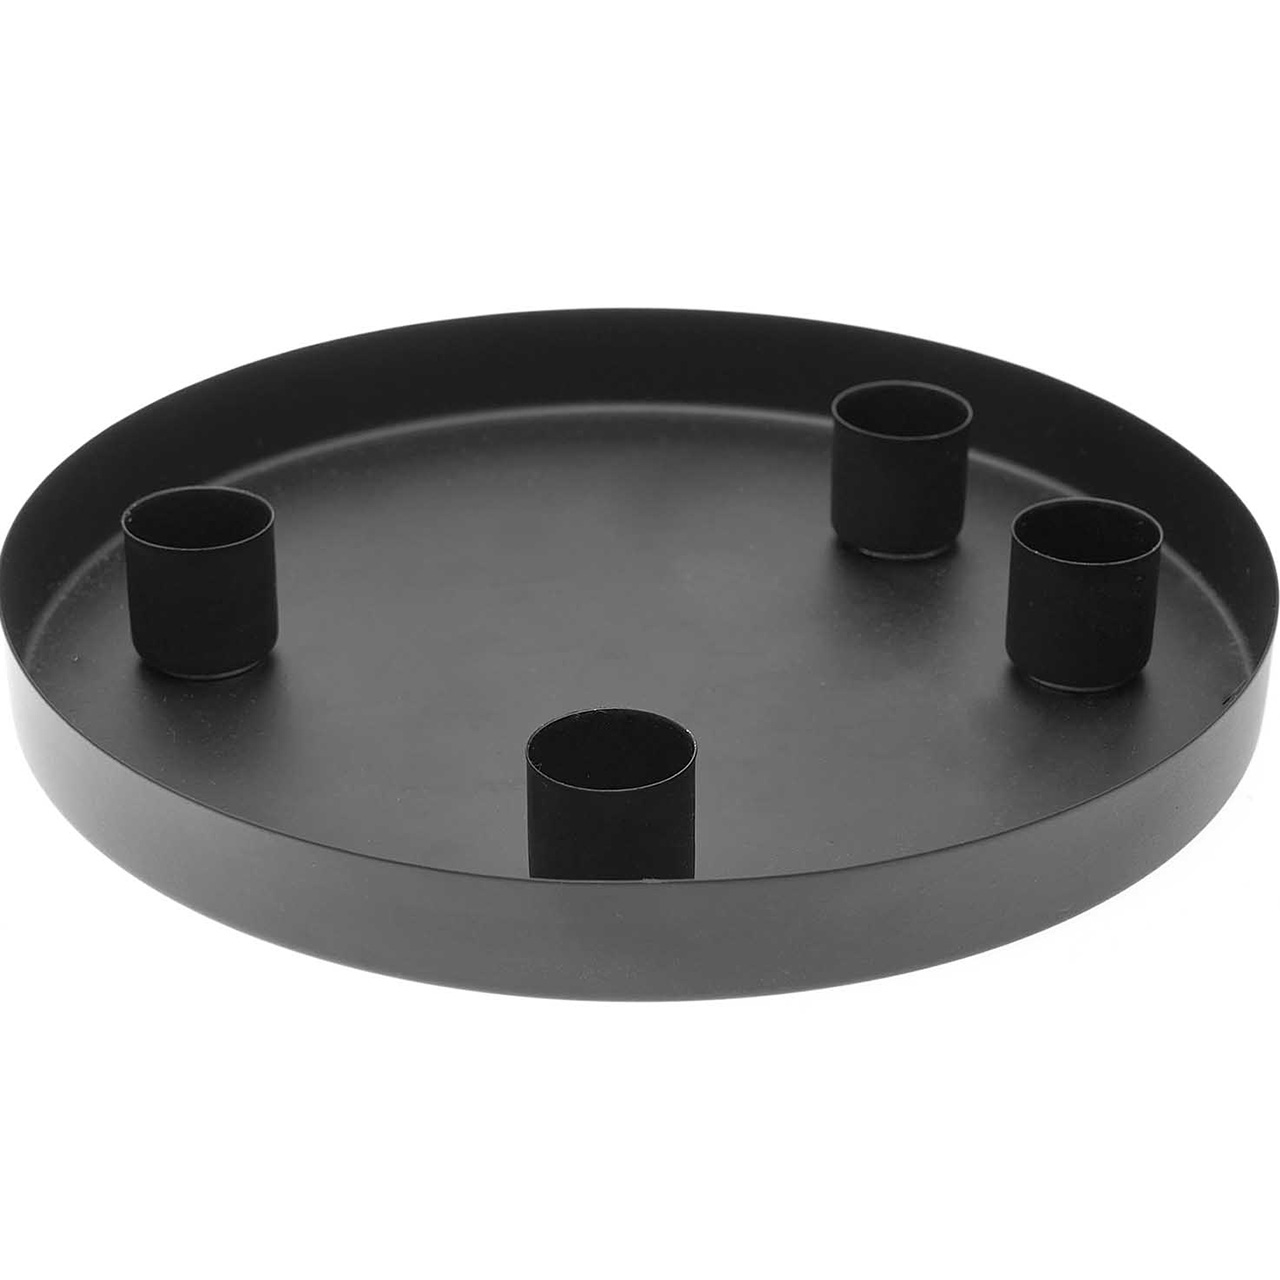 Metal Tray and Candle Holders - Black